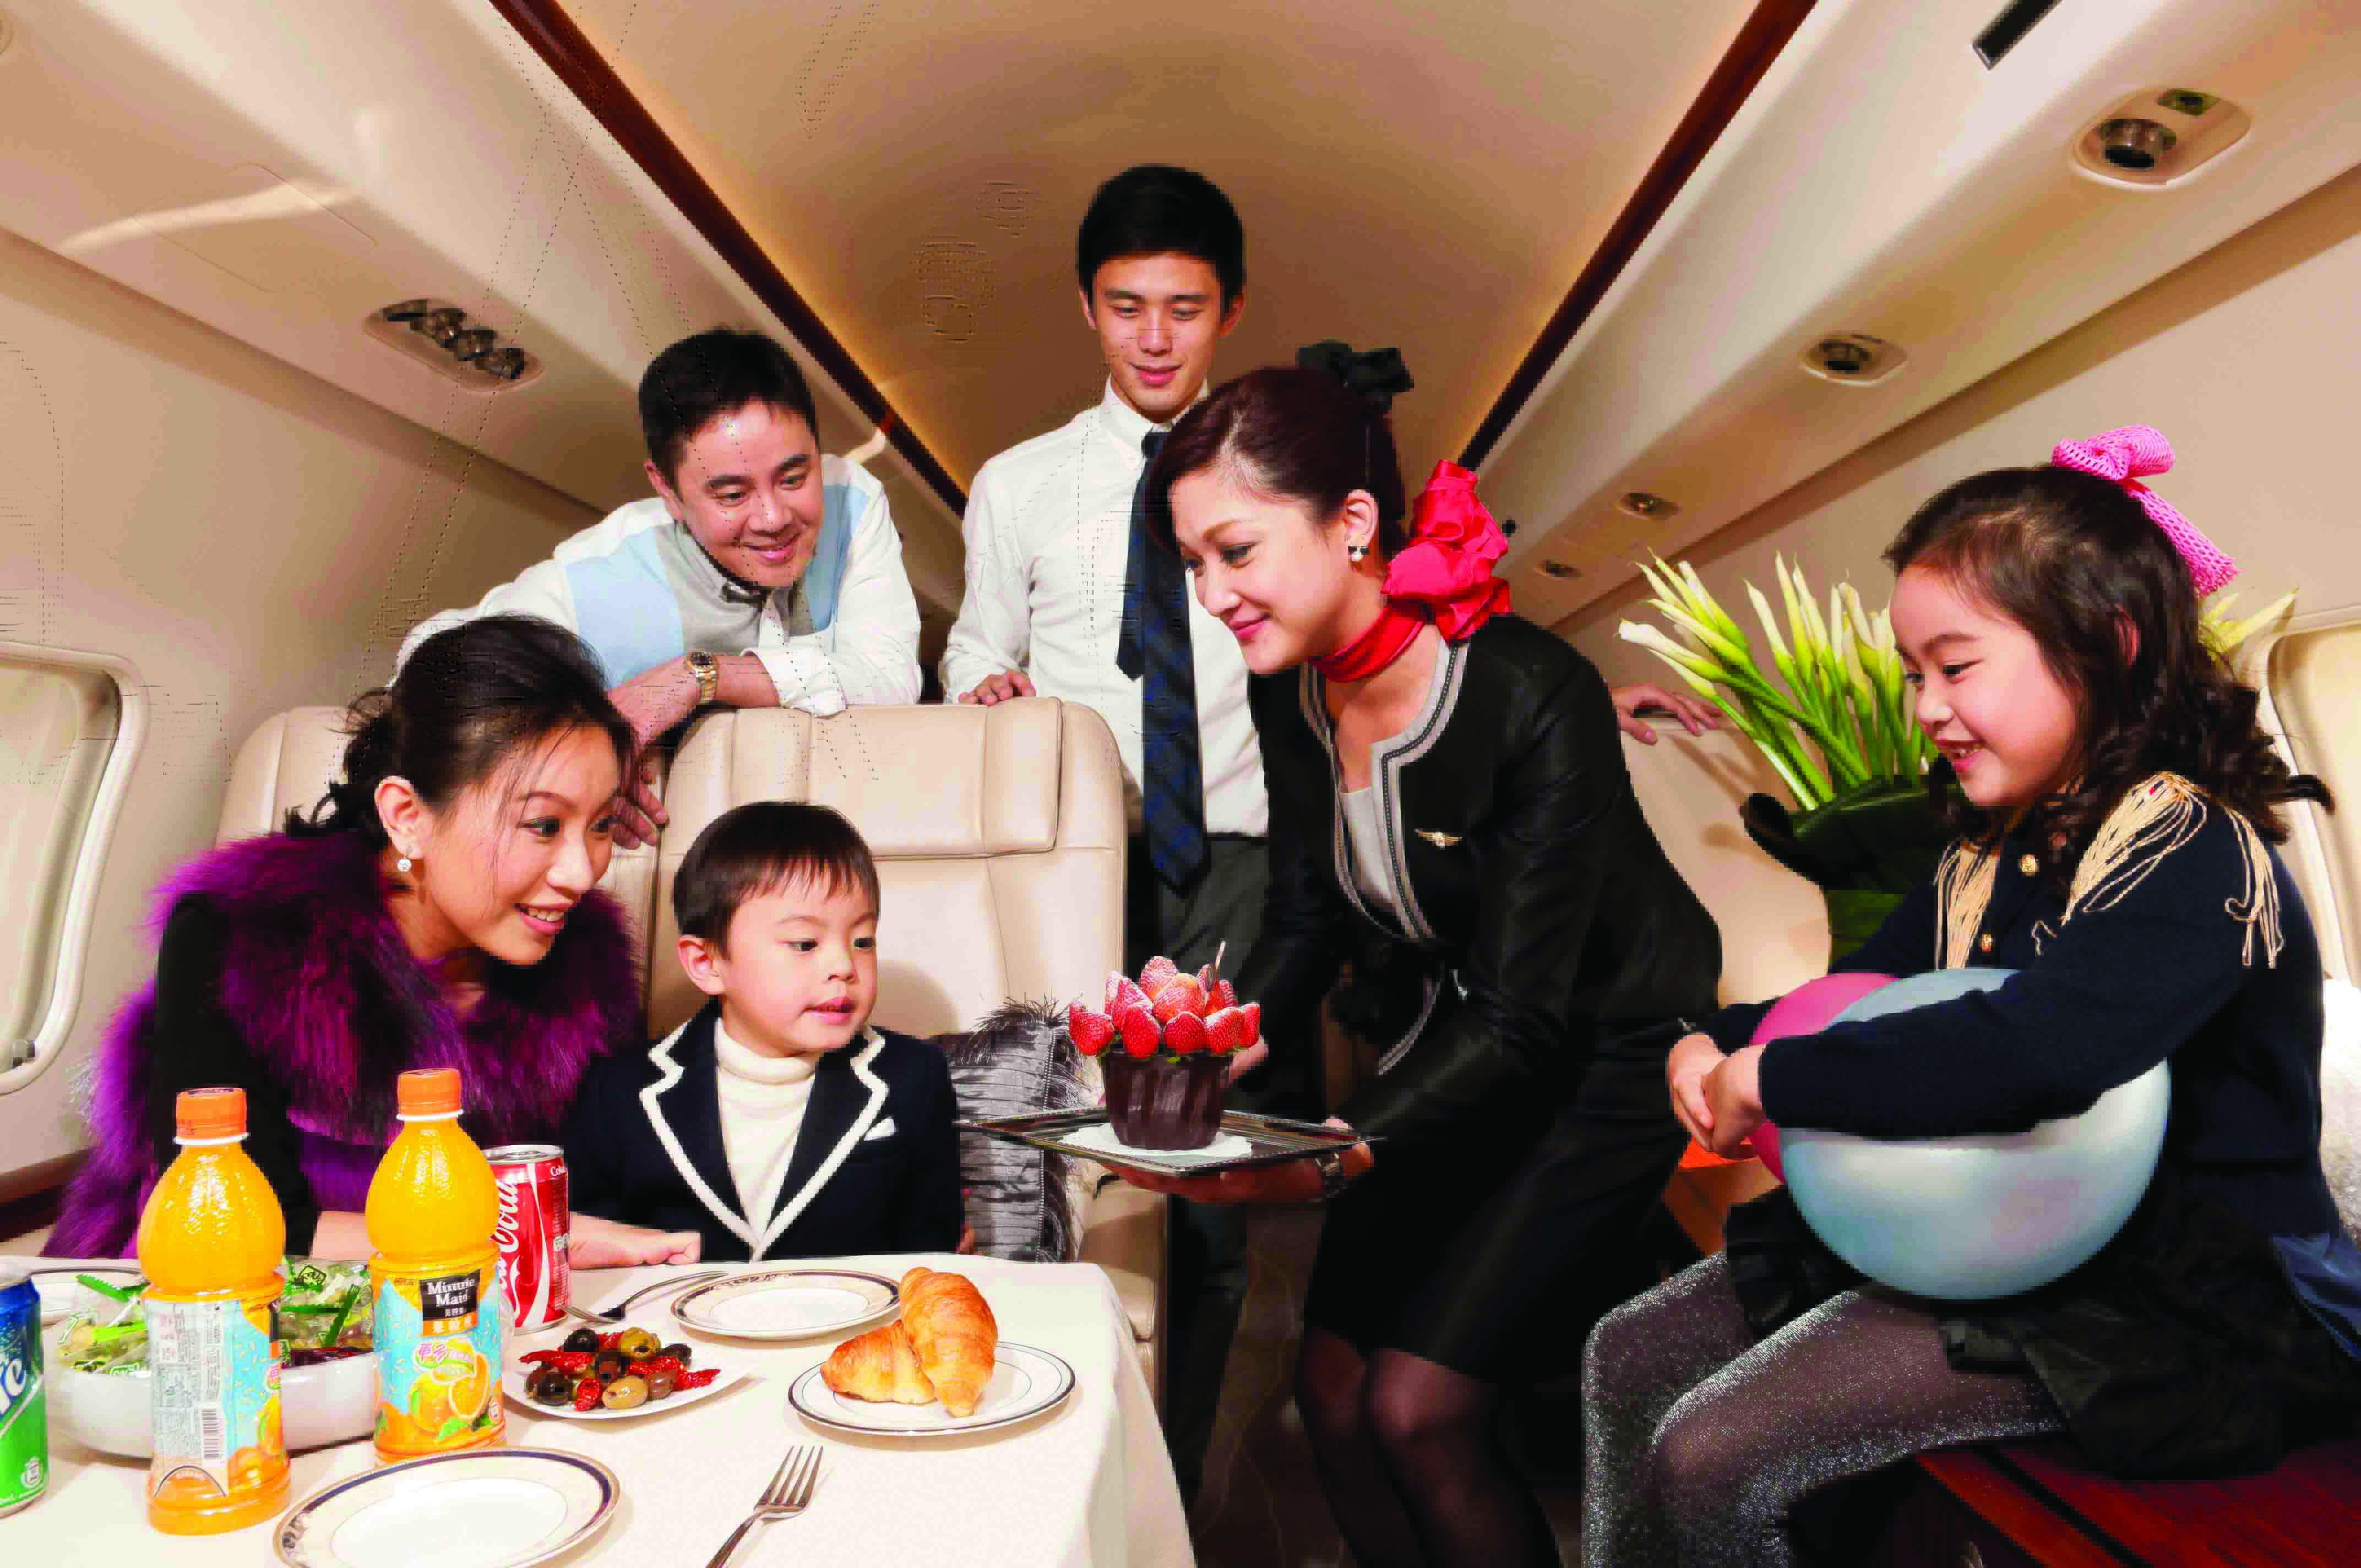 Chinese Family on Private Jet